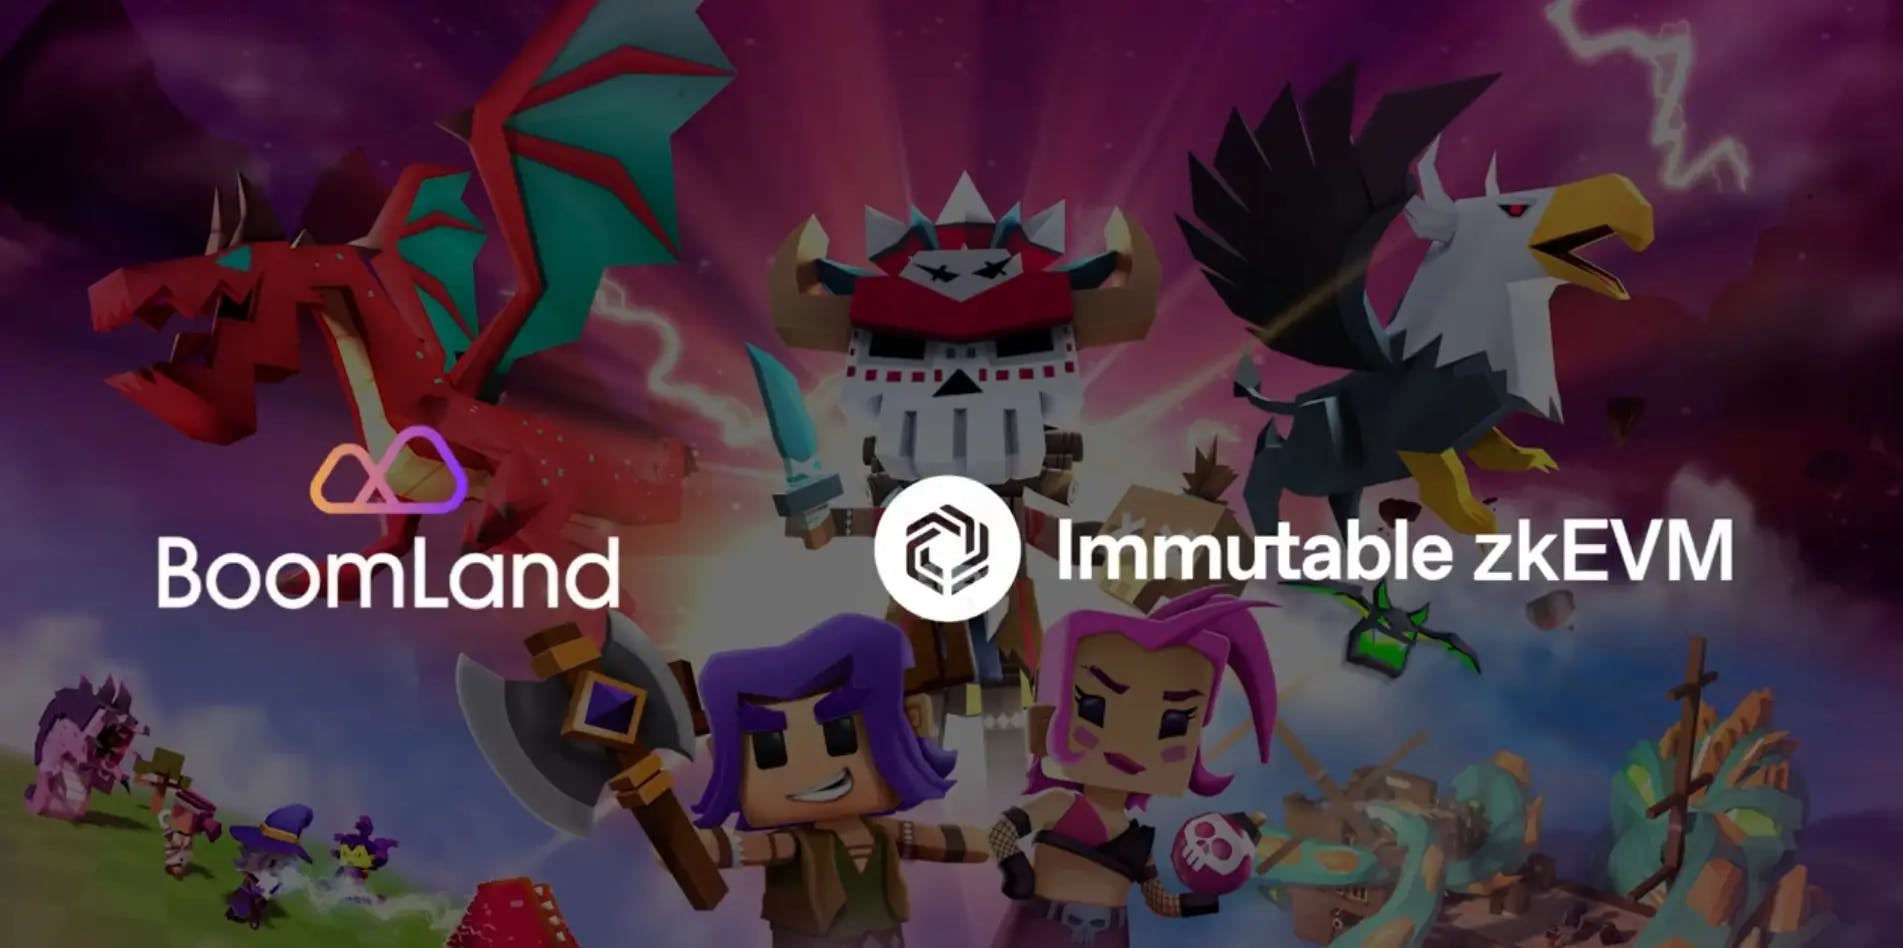 BoomLand's Web3 Game Hunters On-Chain Migrates to Immutable